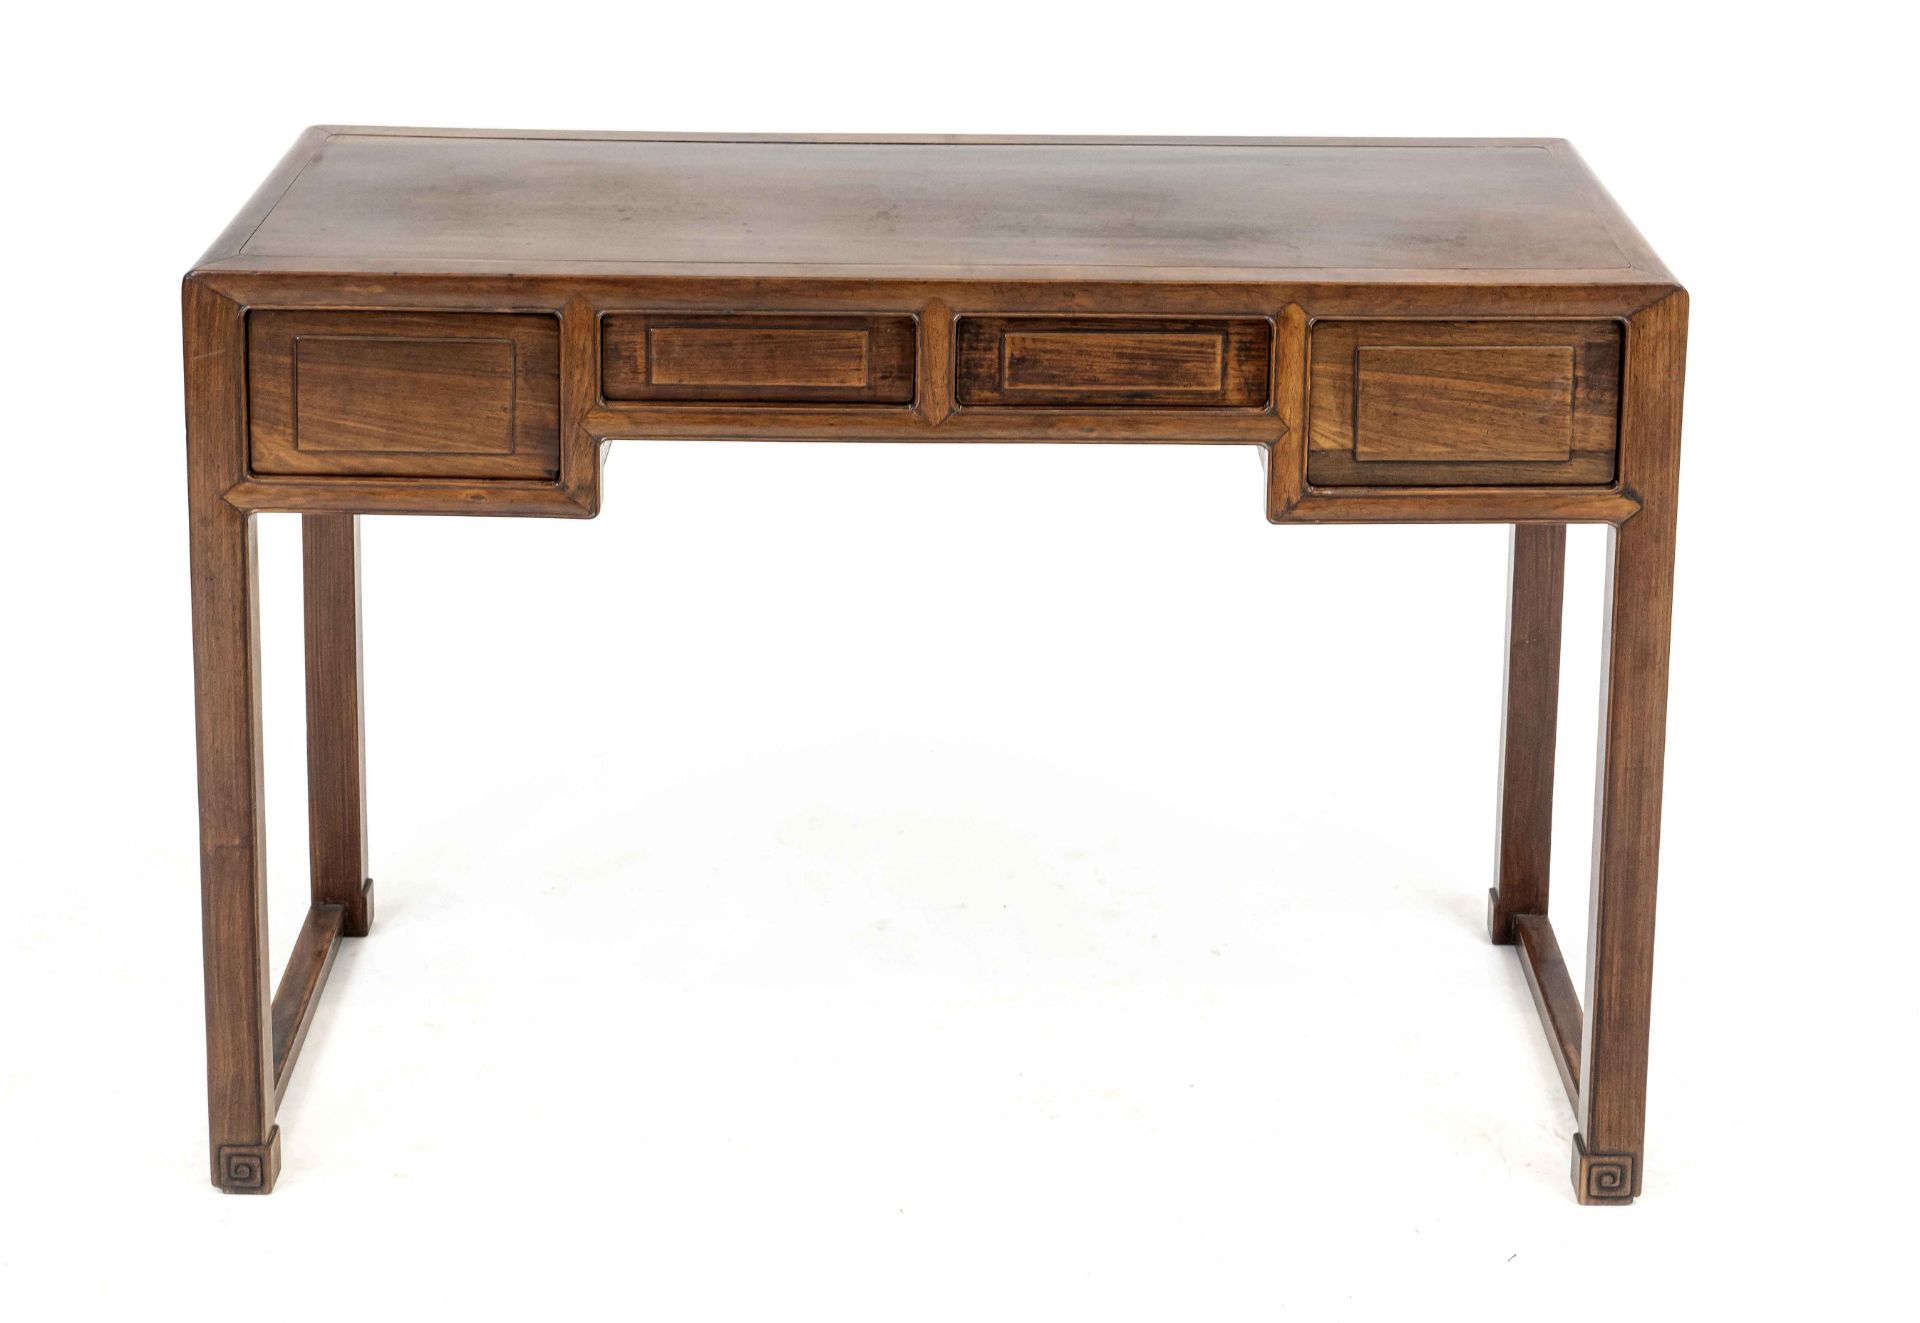 Asian desk, 19th century, typical walnut-like solid wood, frame with four drawers, 80 x 106 x 38 cm